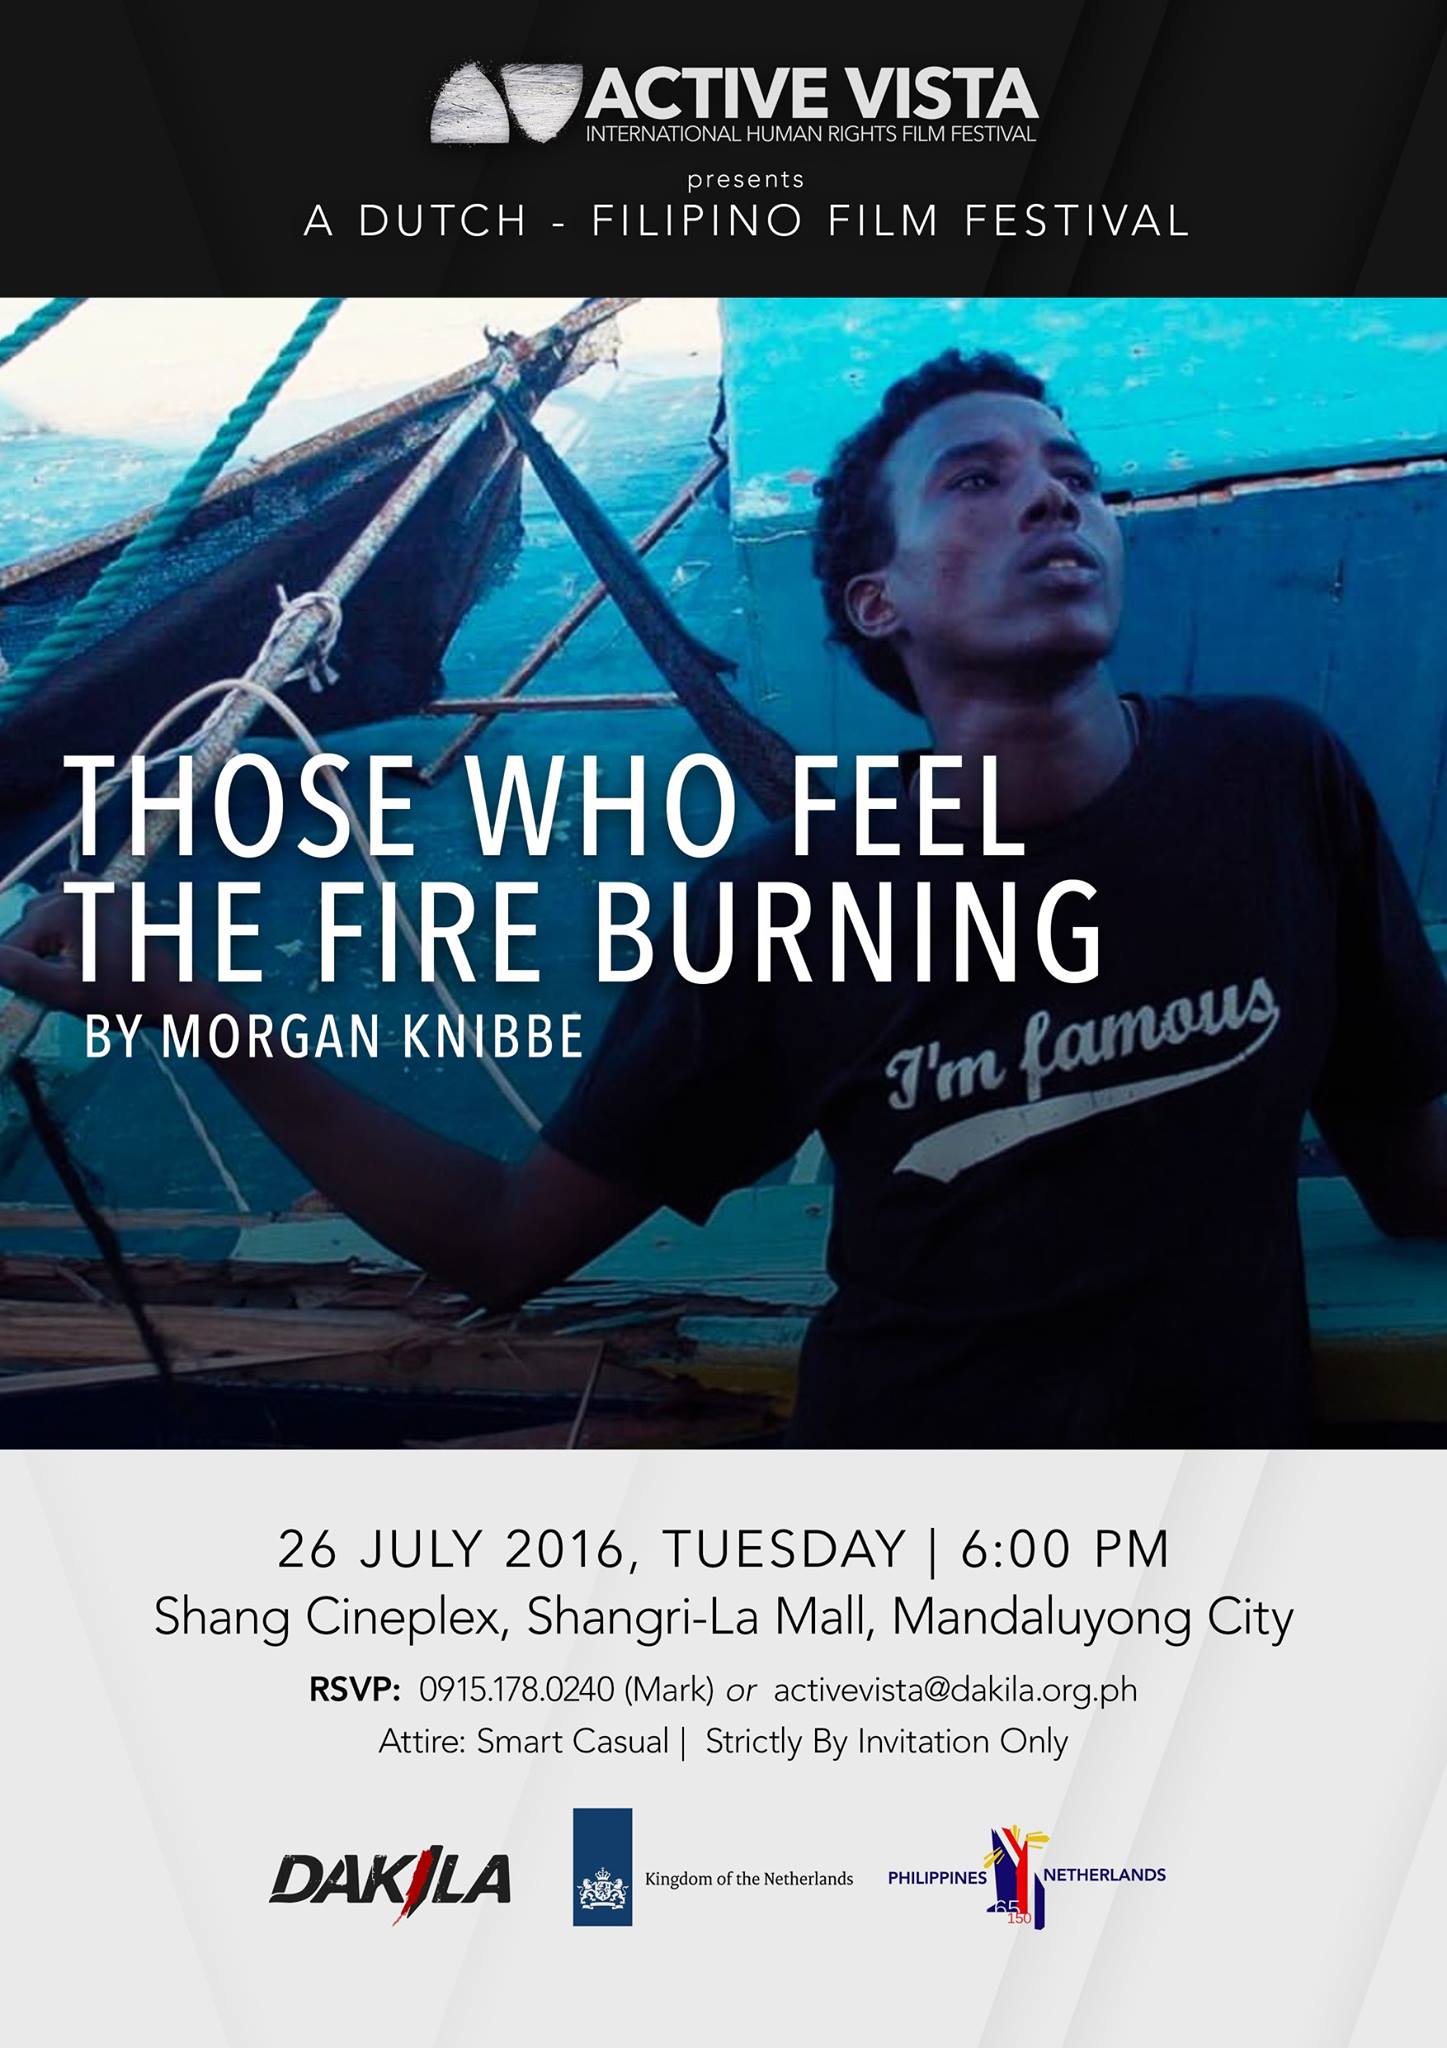 In light of the Anniversary of 65 years of Diplomatic Relations and 150 years of Consular Ties between the Netherlands and the Philippines, join us at the Festival Opening of AV Presents: A Dutch-Filipino Film Festival with a screening of Those Who Feel the Fire Burning by Morgan Knibbe on July 26, Tuesday at Shang Cineplex, Shangri-La Mall, EDSA, Mandaluyong City. Cocktails will be held at The Atrium by 6:00 PM. Kindly confirm attendance. Thank you!